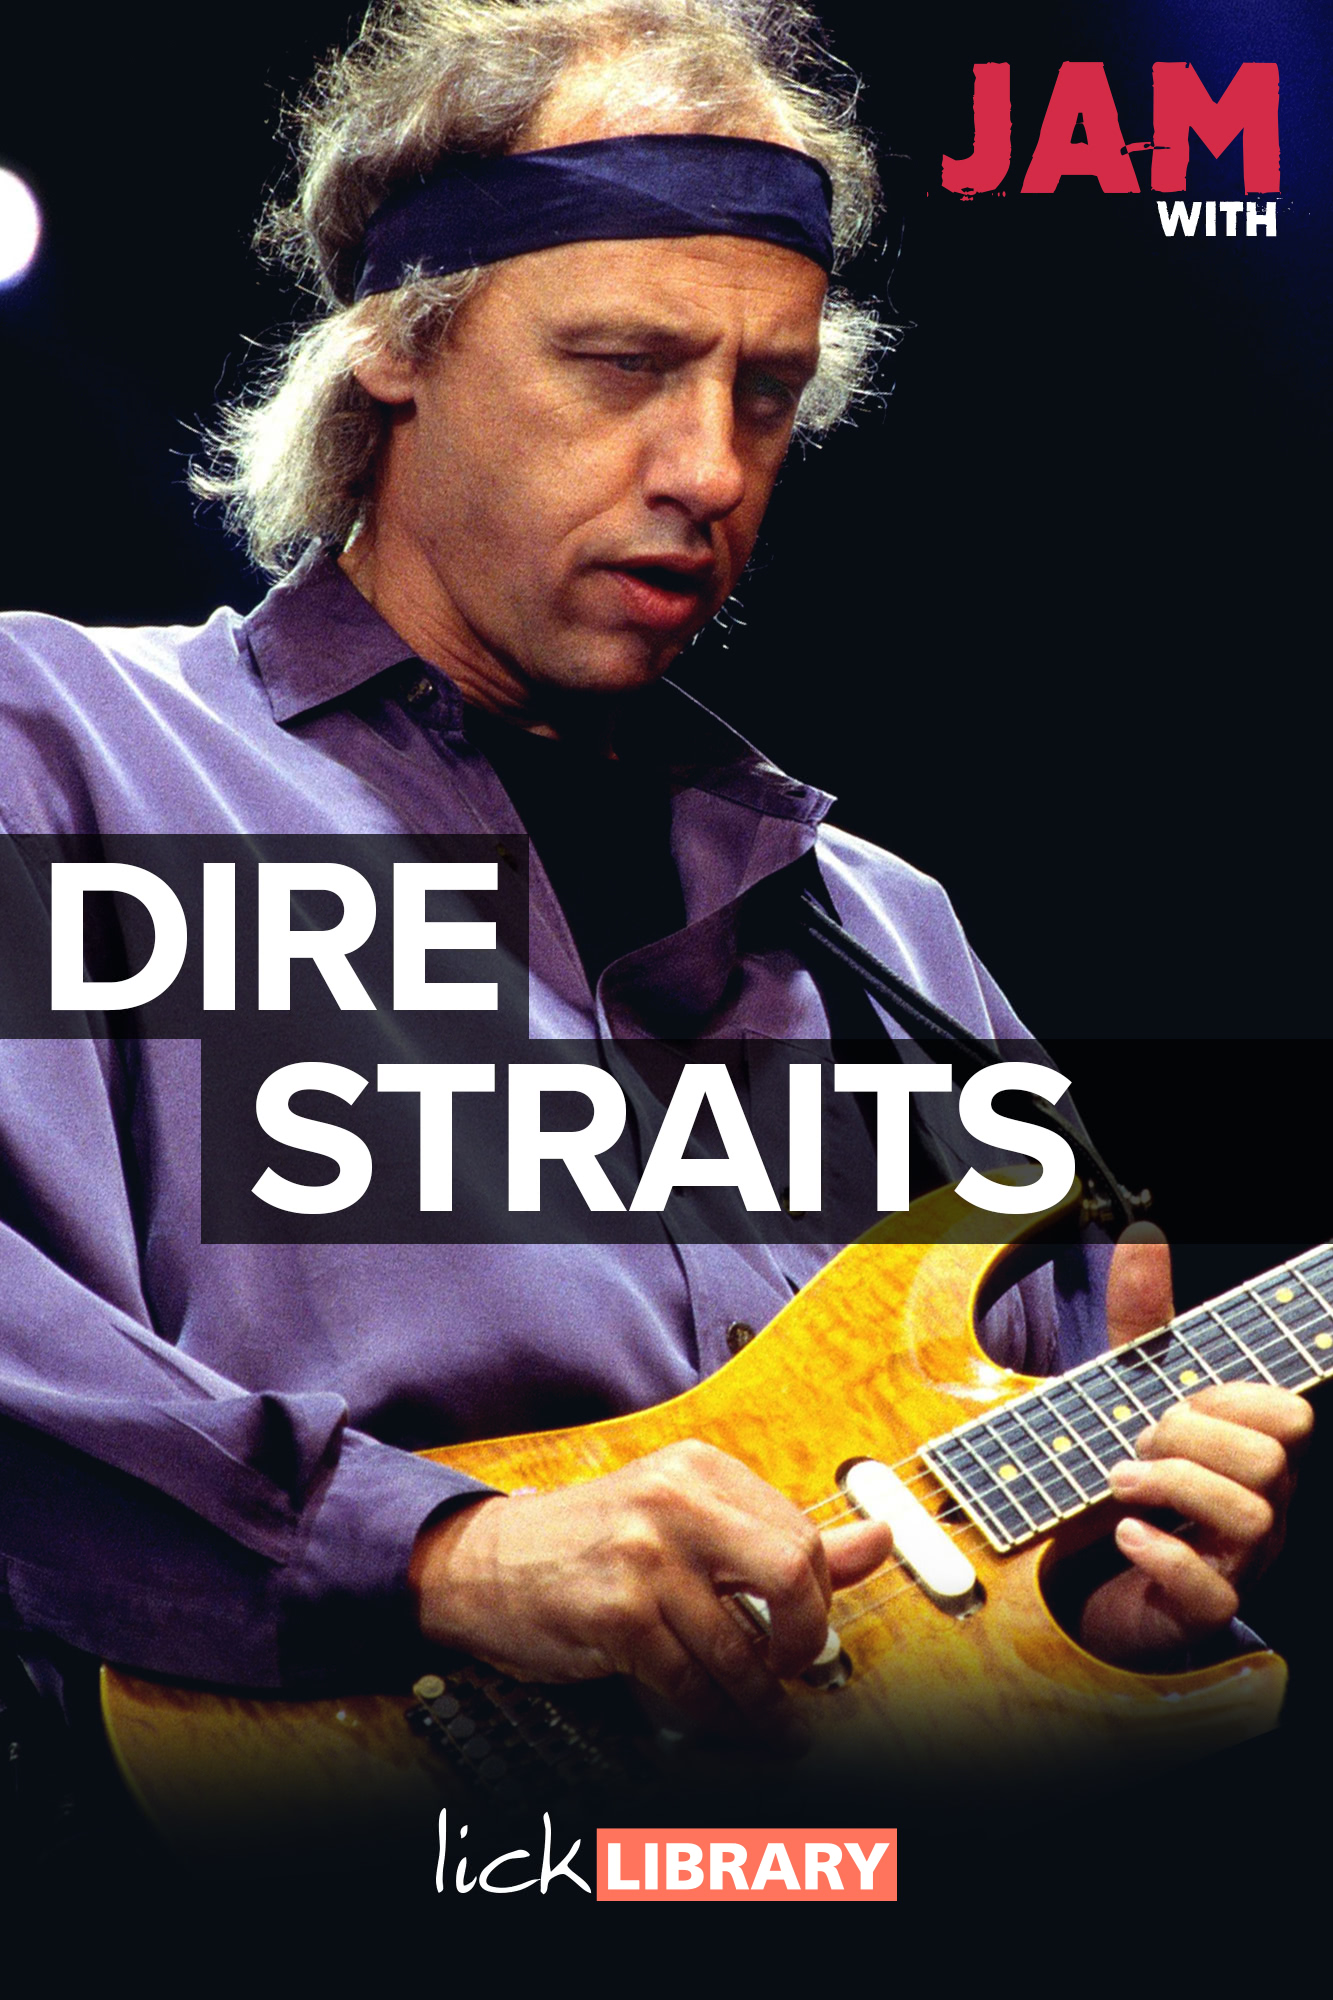 Jam With Dire Straits